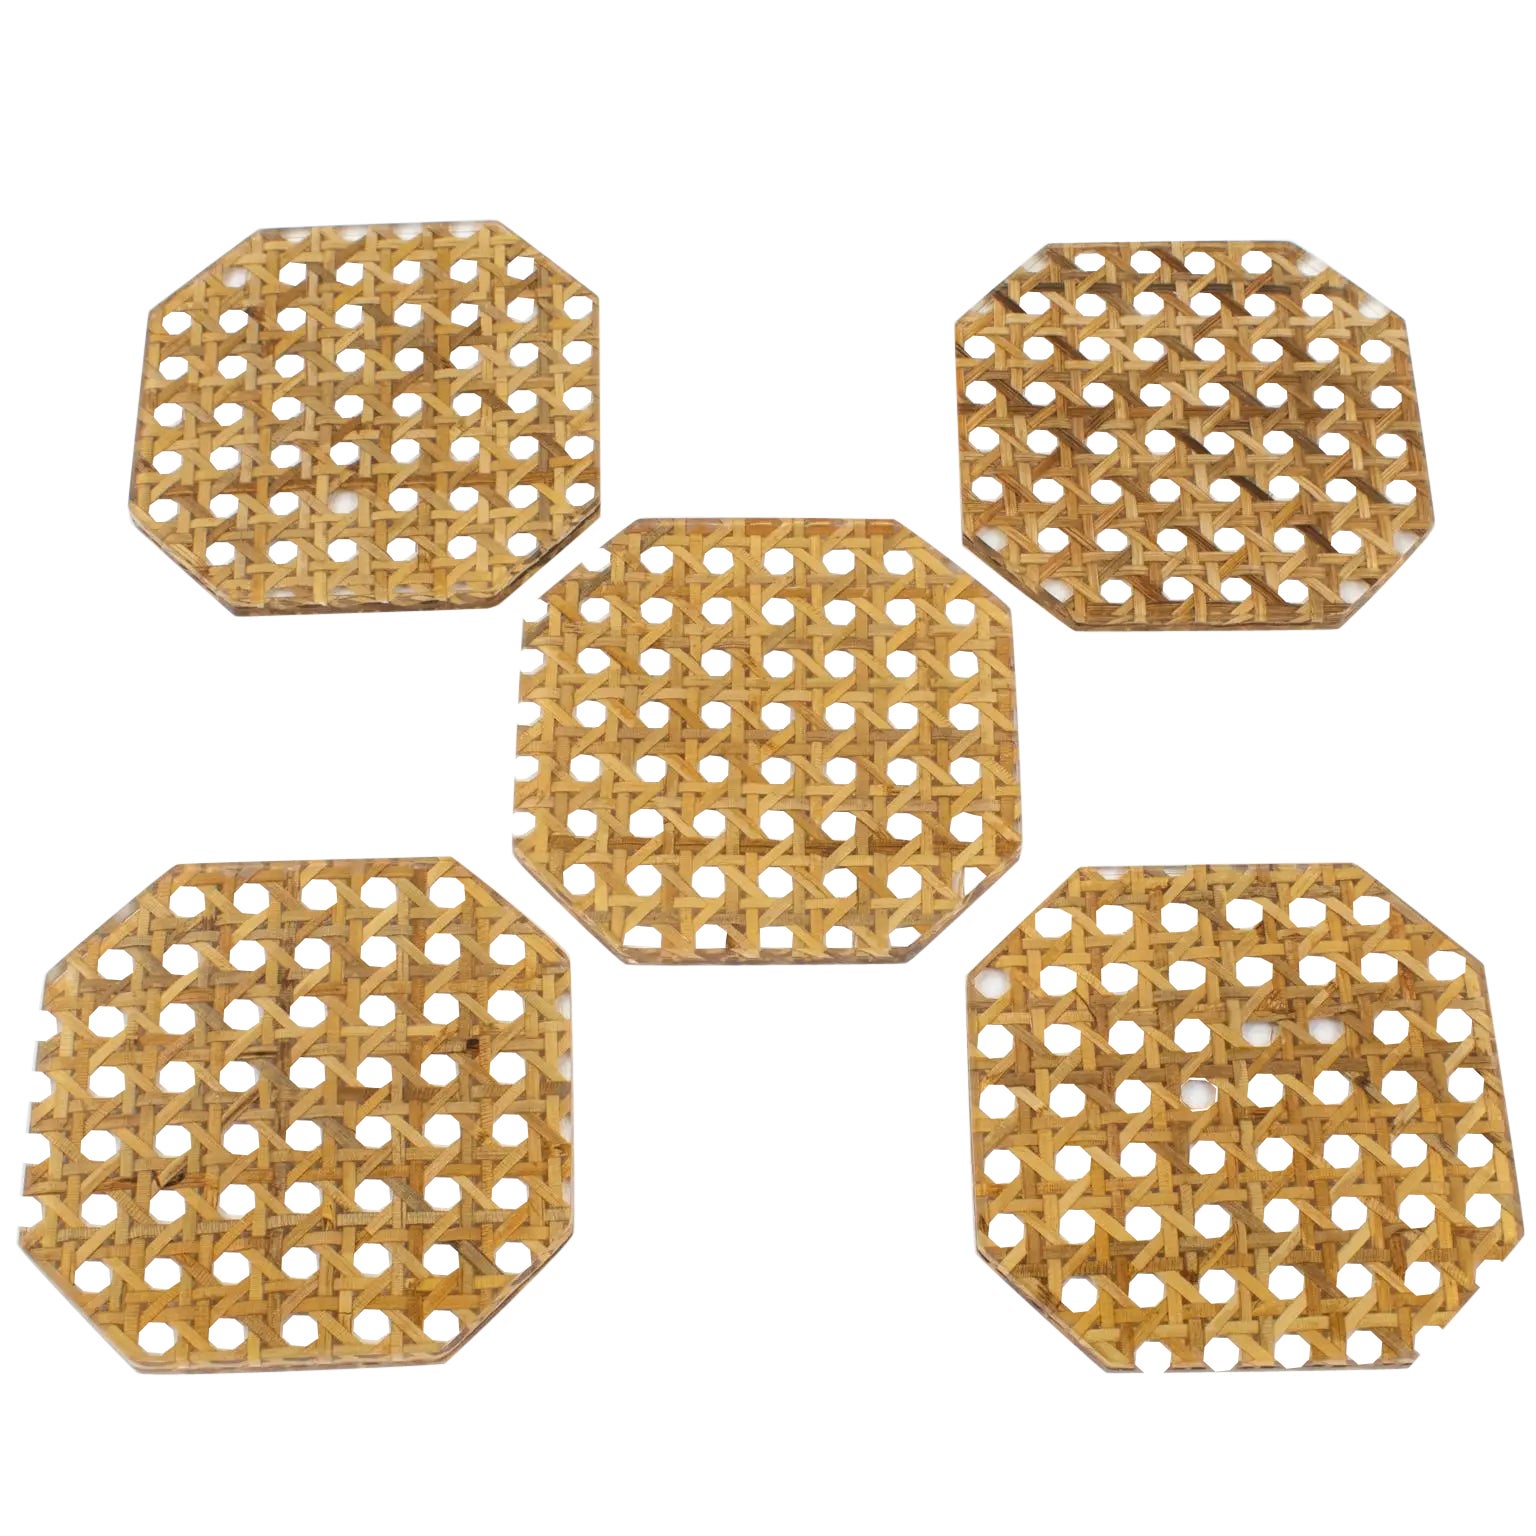 Christian Dior Lucite and Rattan Barware Coasters, set of 5 pieces